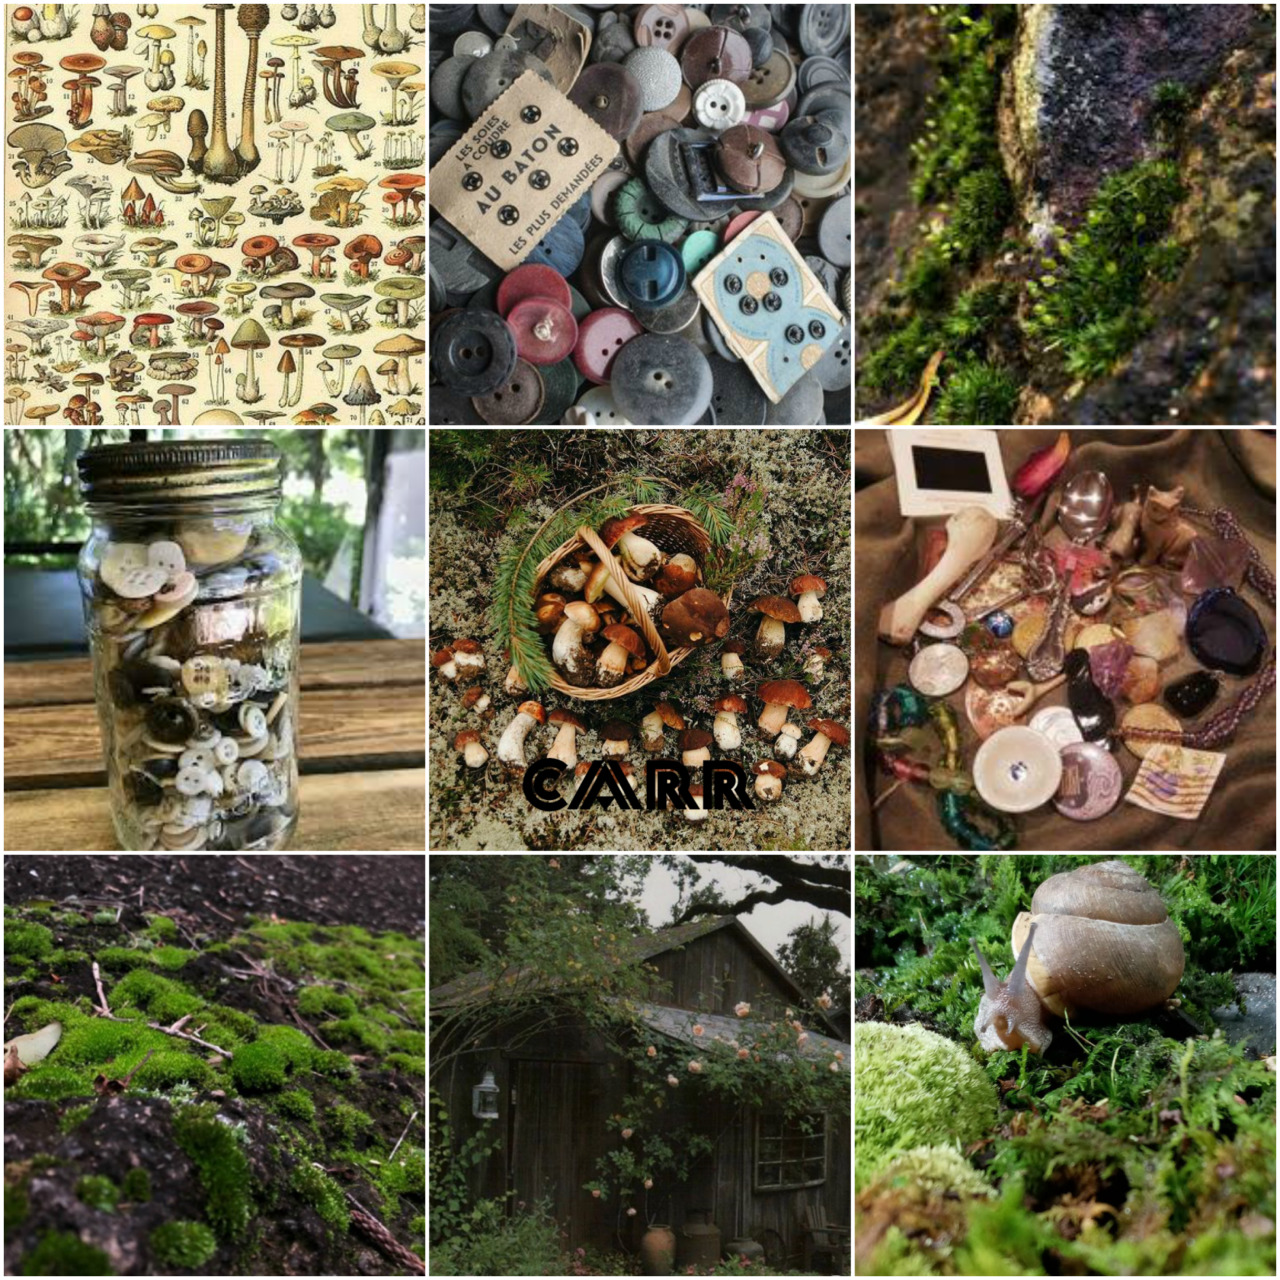 goblincore aesthetic  Goblincore aesthetic, Aesthetic collage